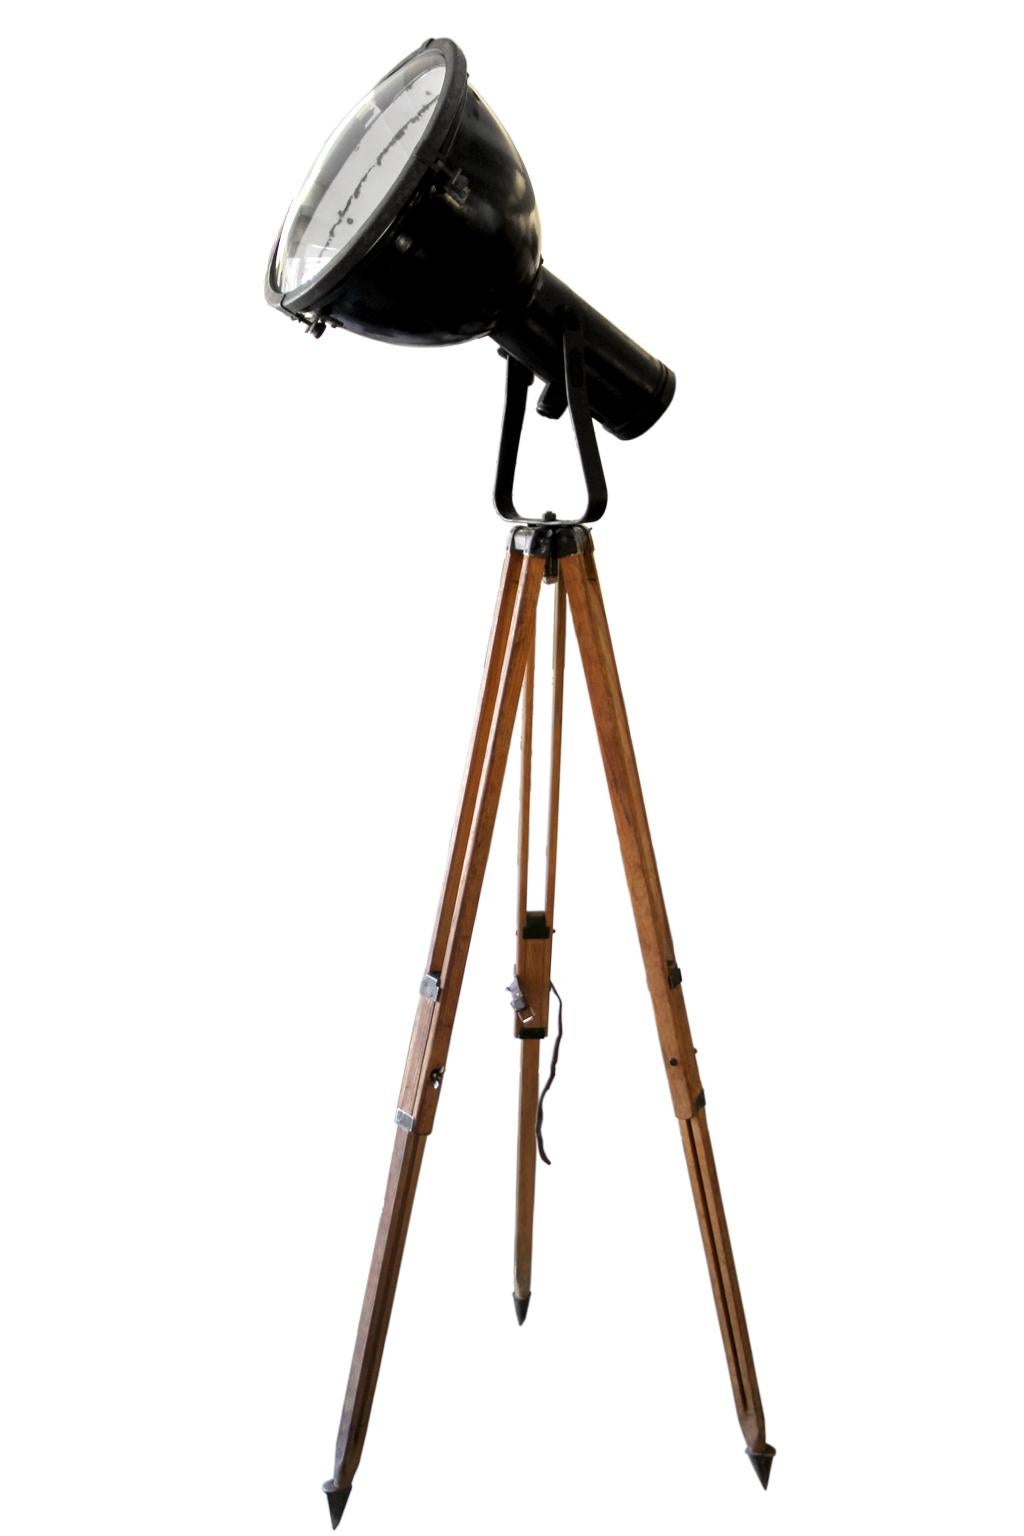 Industrial spot on wooden tripod. Adjustable height and angle, black enamel spot white interior with original rounded glass diam. 38.5 cm. max tripod height 140 cm. 13 kg total height as on left picture: 195 cm. E27 max 150W.
Electra wire 4 meter